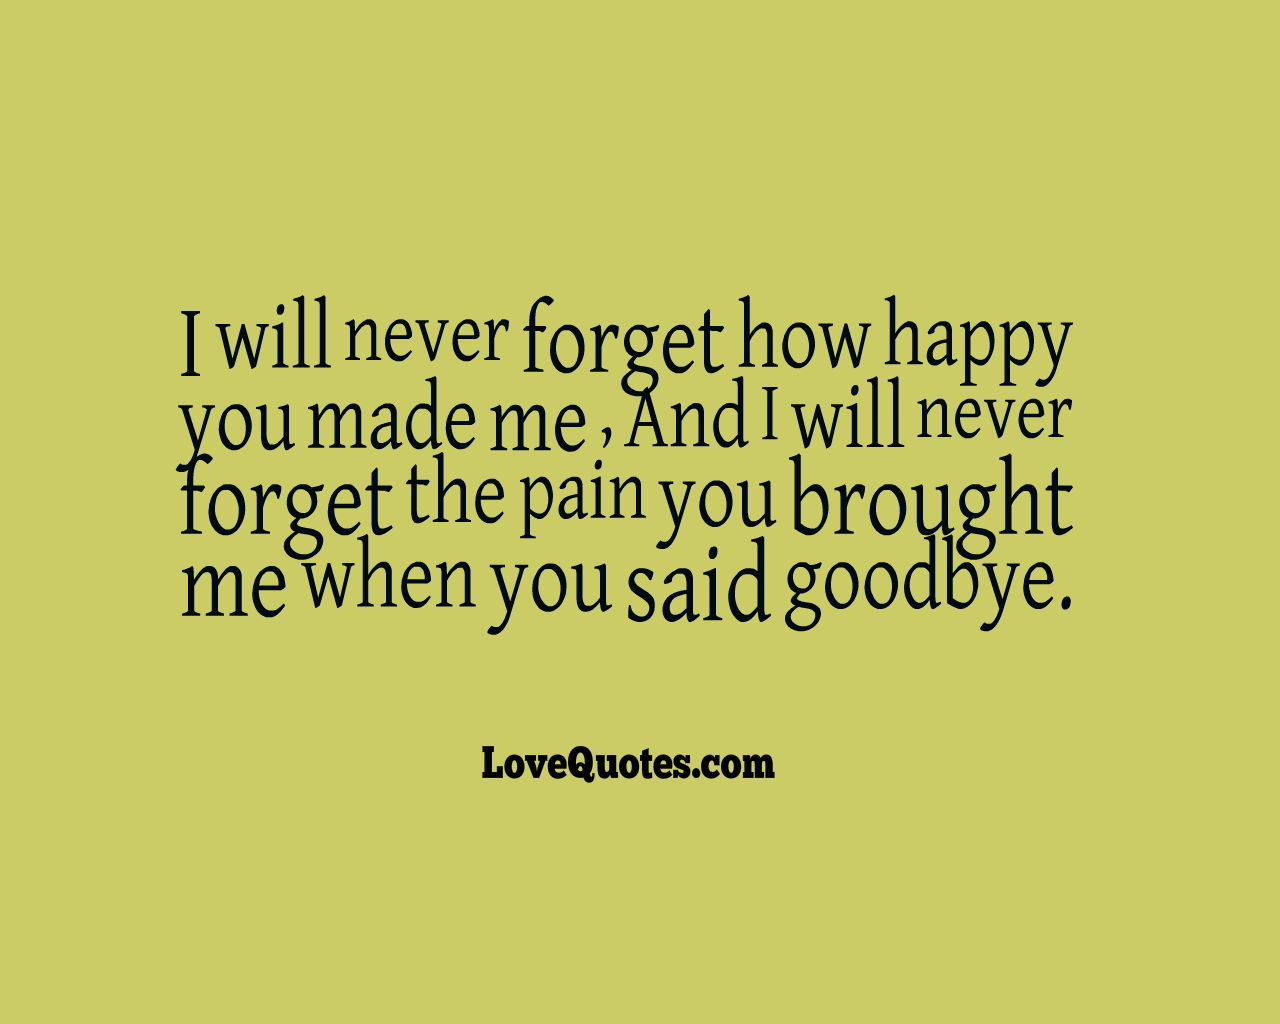 I Will Never Forget Love Quotes